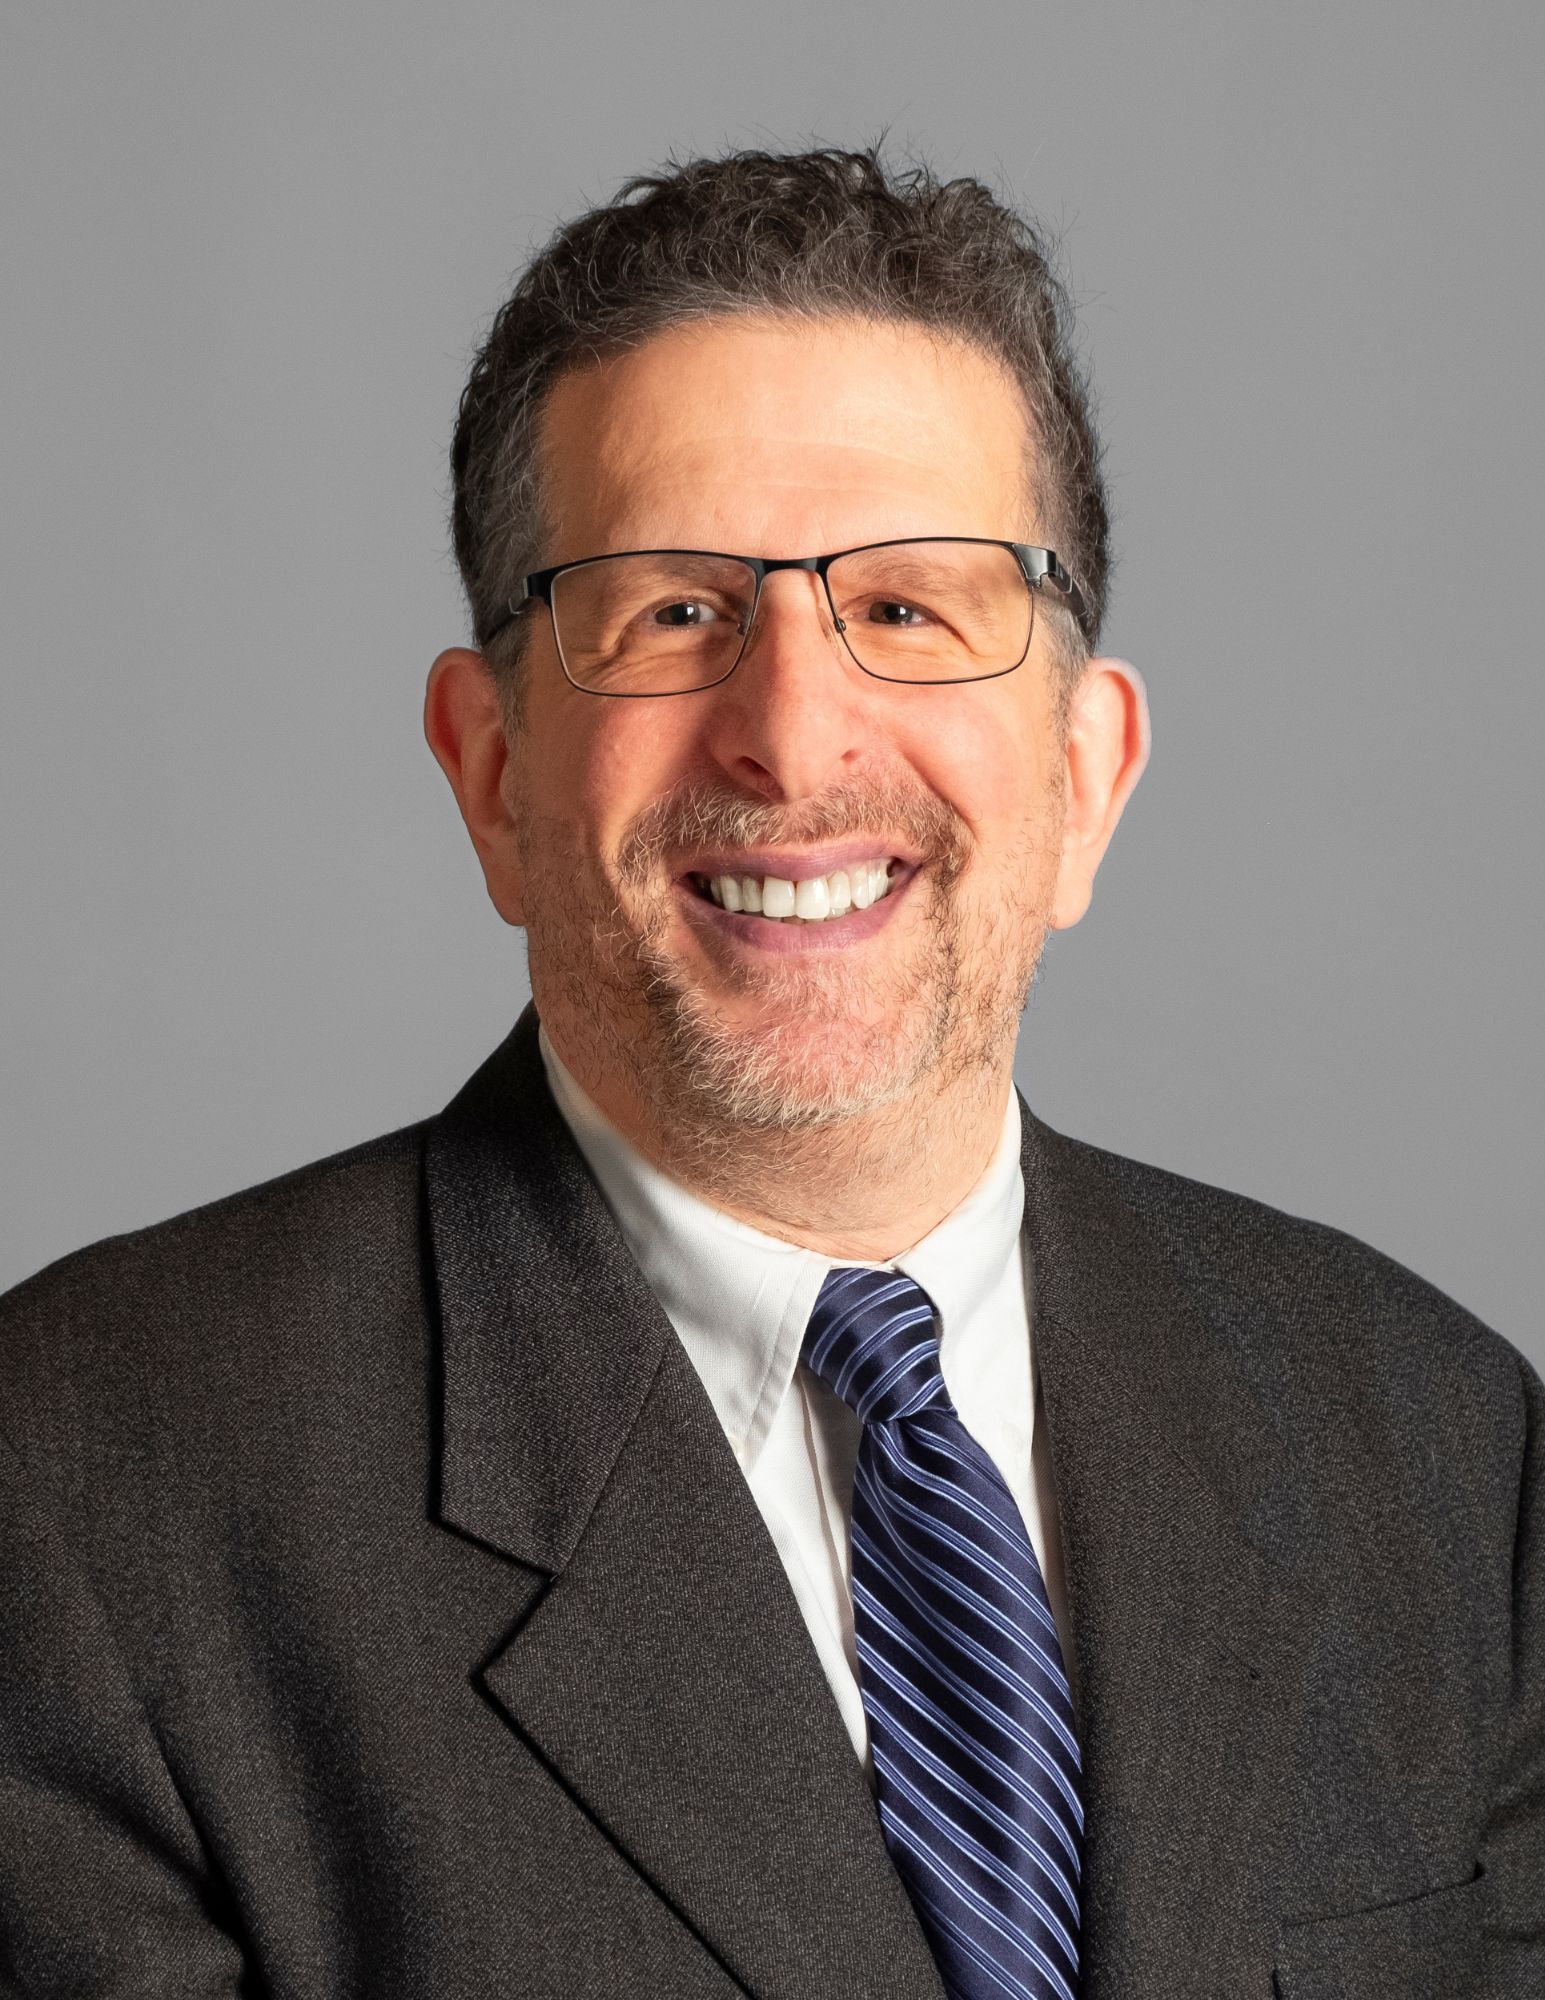 This image is a professional headshot of a man with short, dark hair. He is wearing glasses, a dark suit jacket, a white dress shirt, and a blue striped tie. The background is a simple gray, and he is smiling.